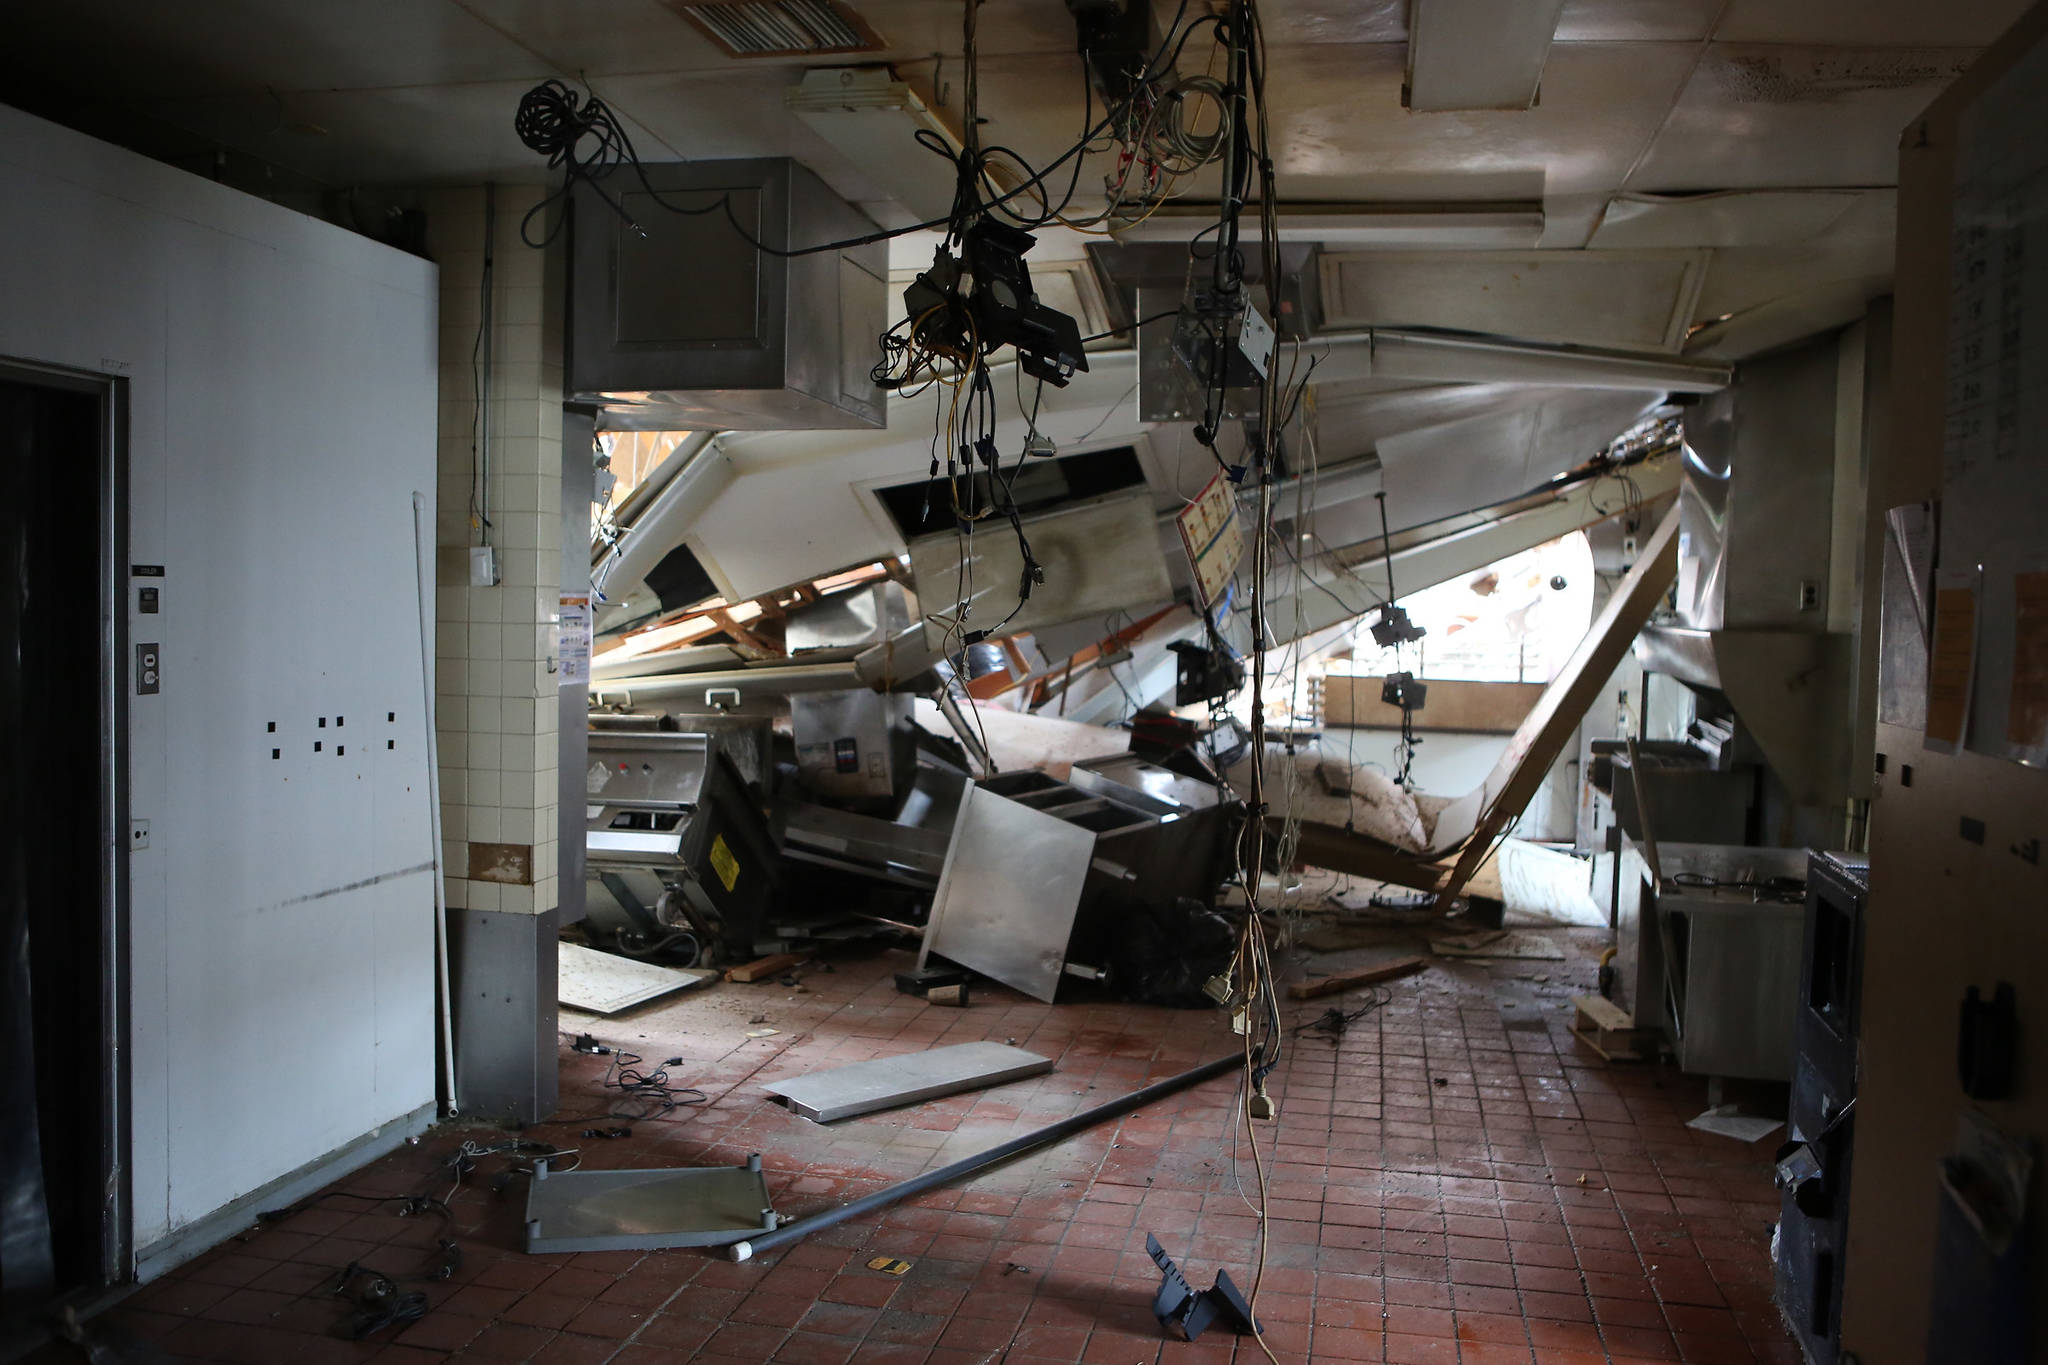 Photo by John Fisken
The inside of the Oak Harbor McDonald’s is unrecognizable as demolition of the store got underway this week.